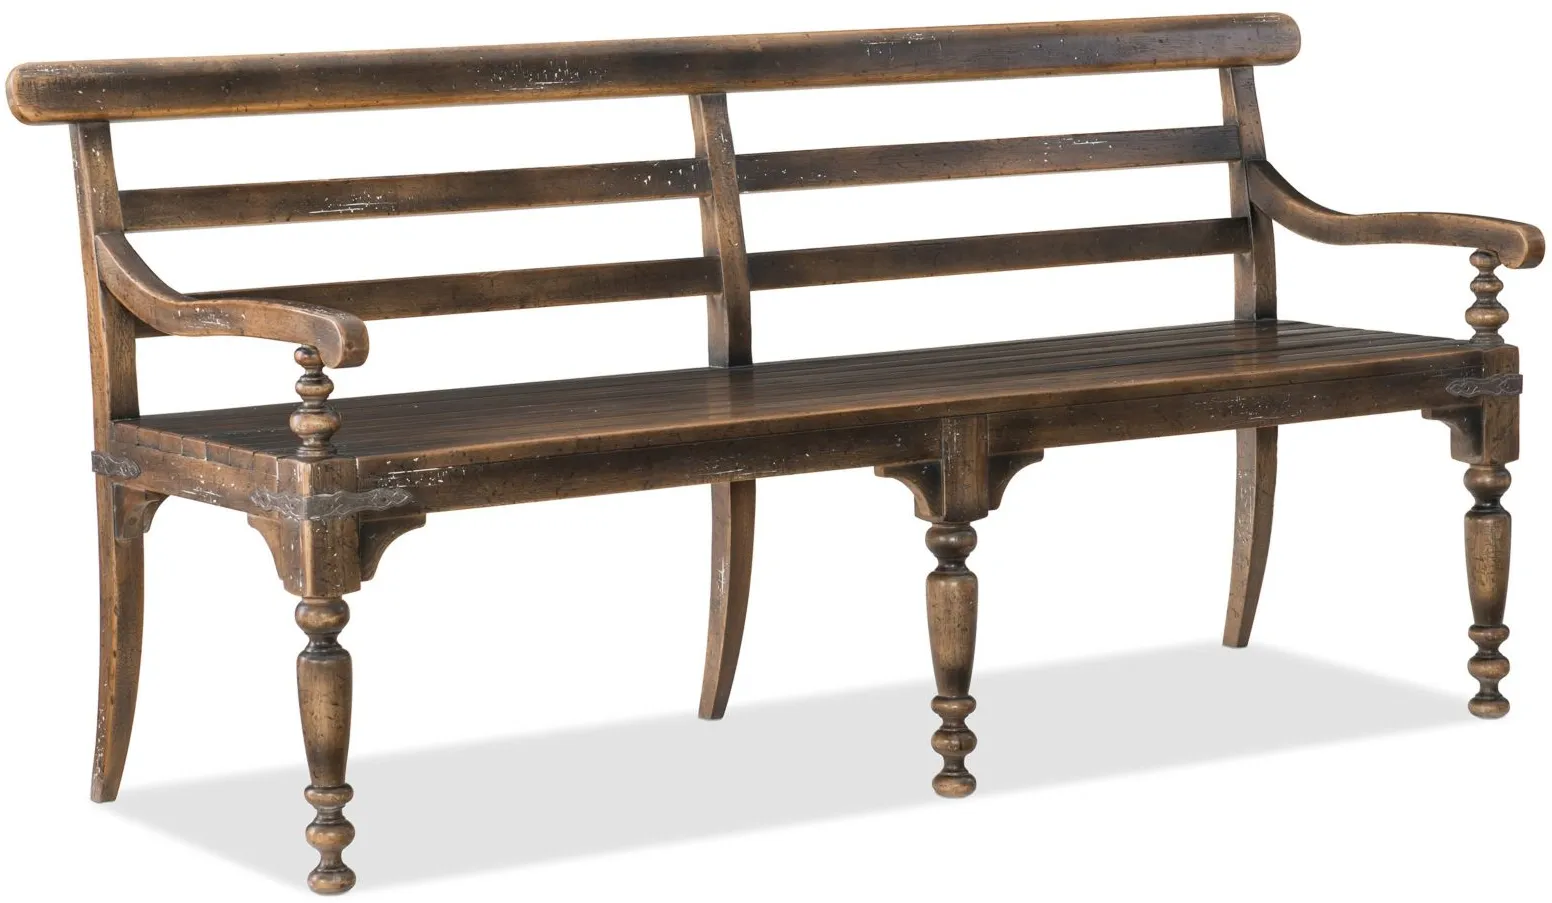 Hill Country Dining Bench in Saddle Brown by Hooker Furniture